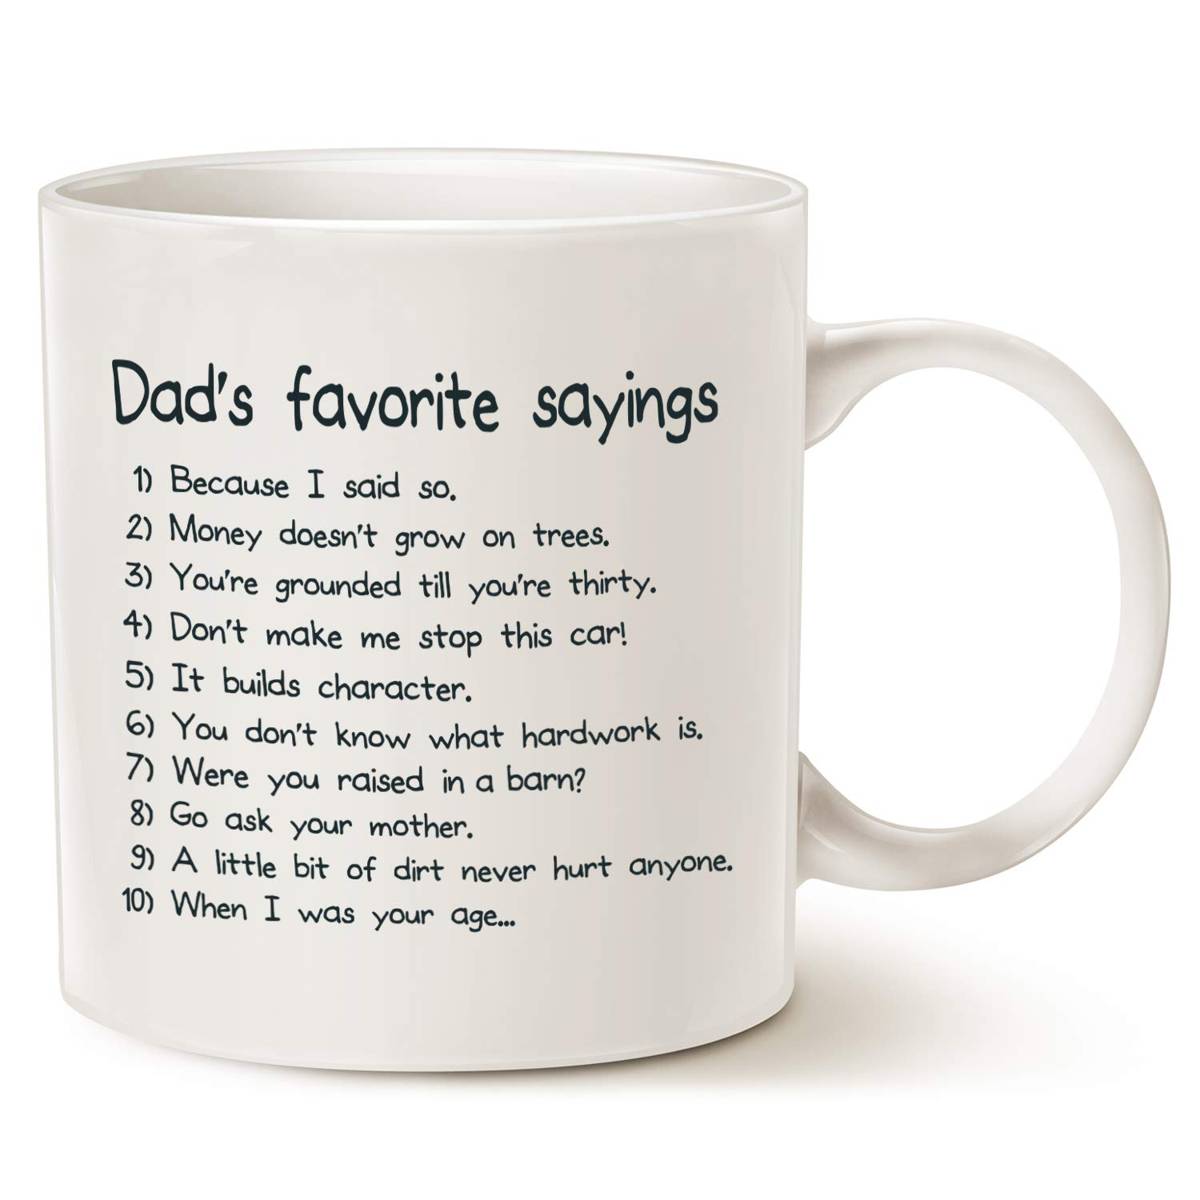 Funny dad gifts